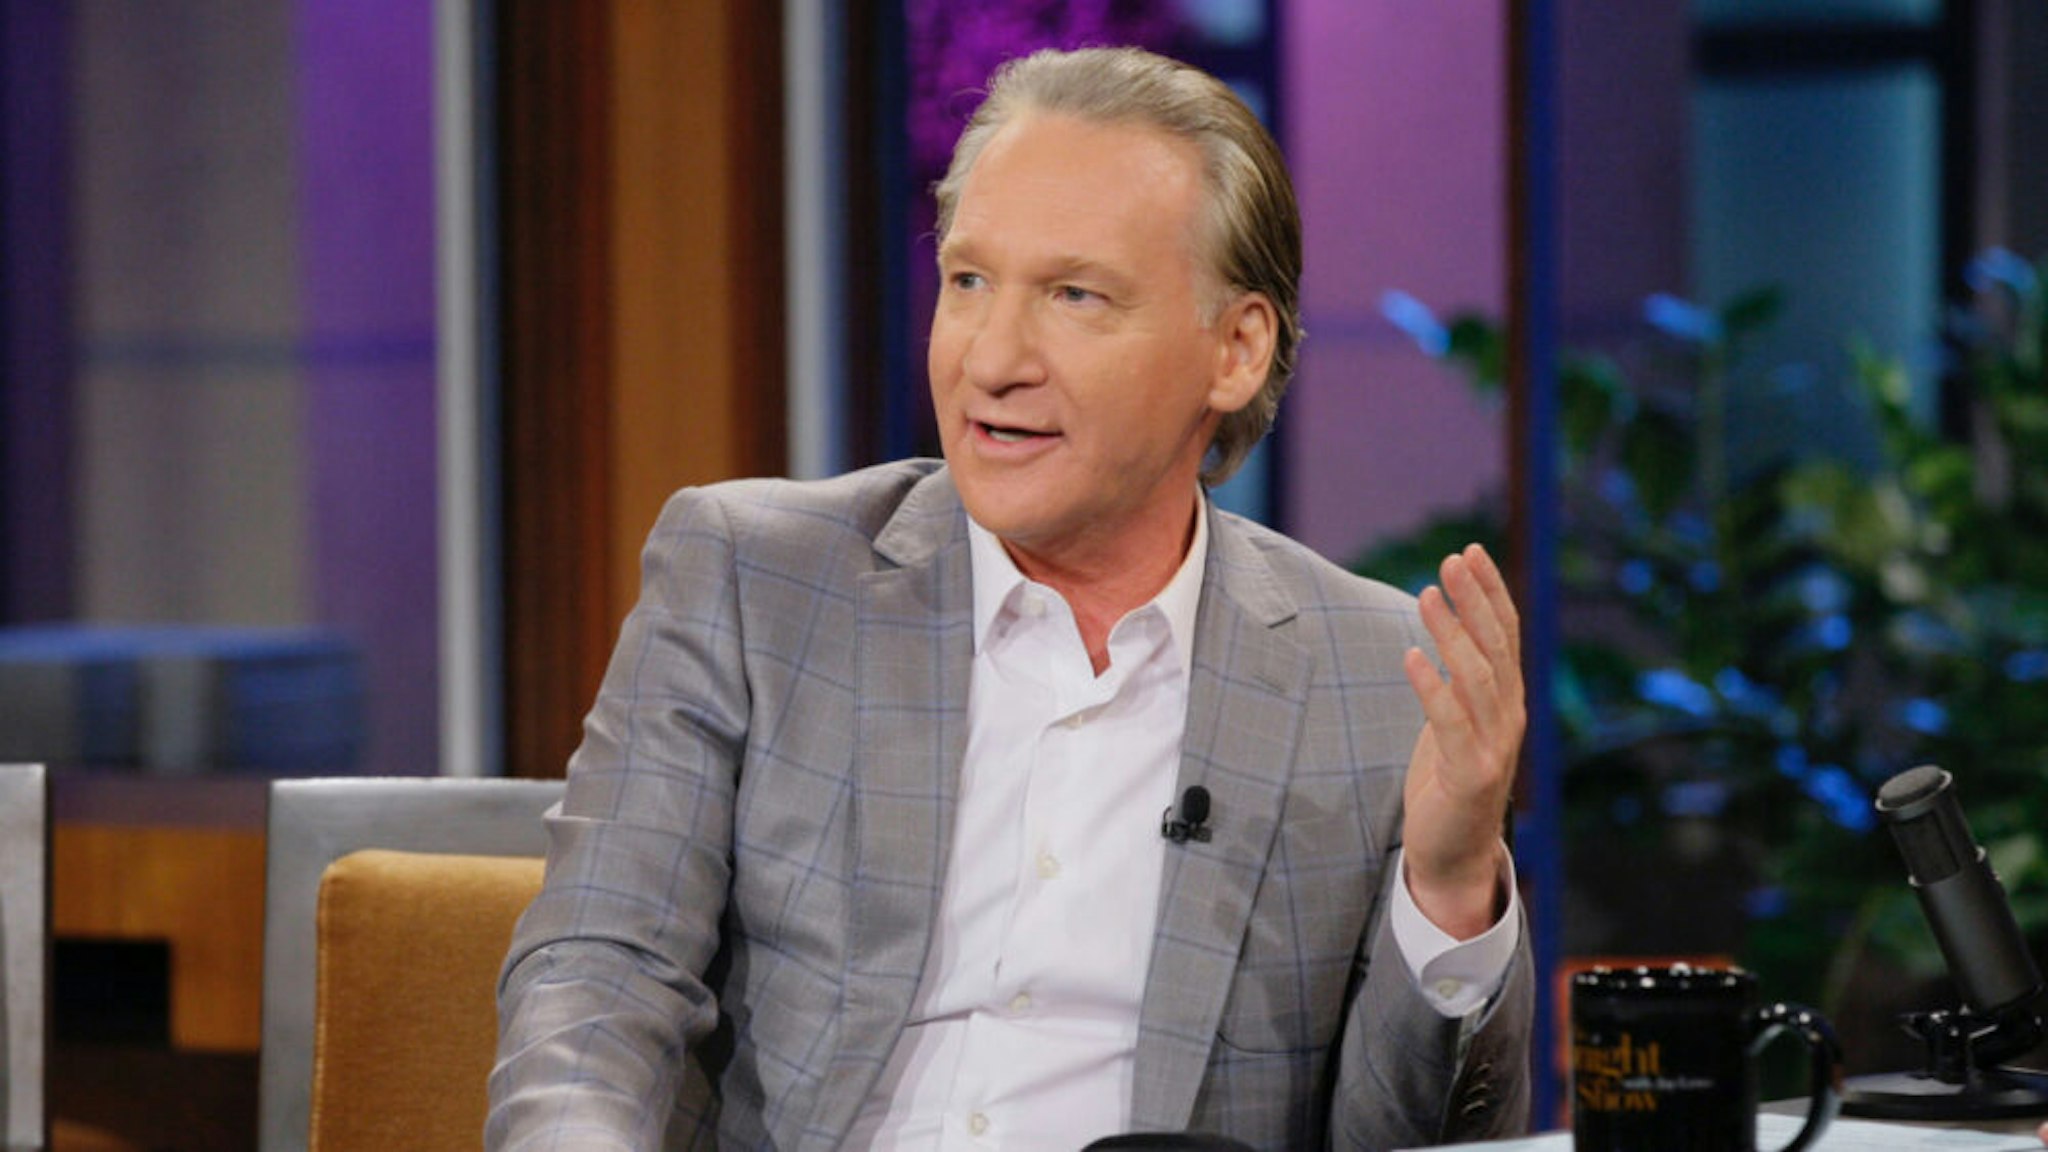 Comedian Bill Maher during an interview on September 3, 2013.